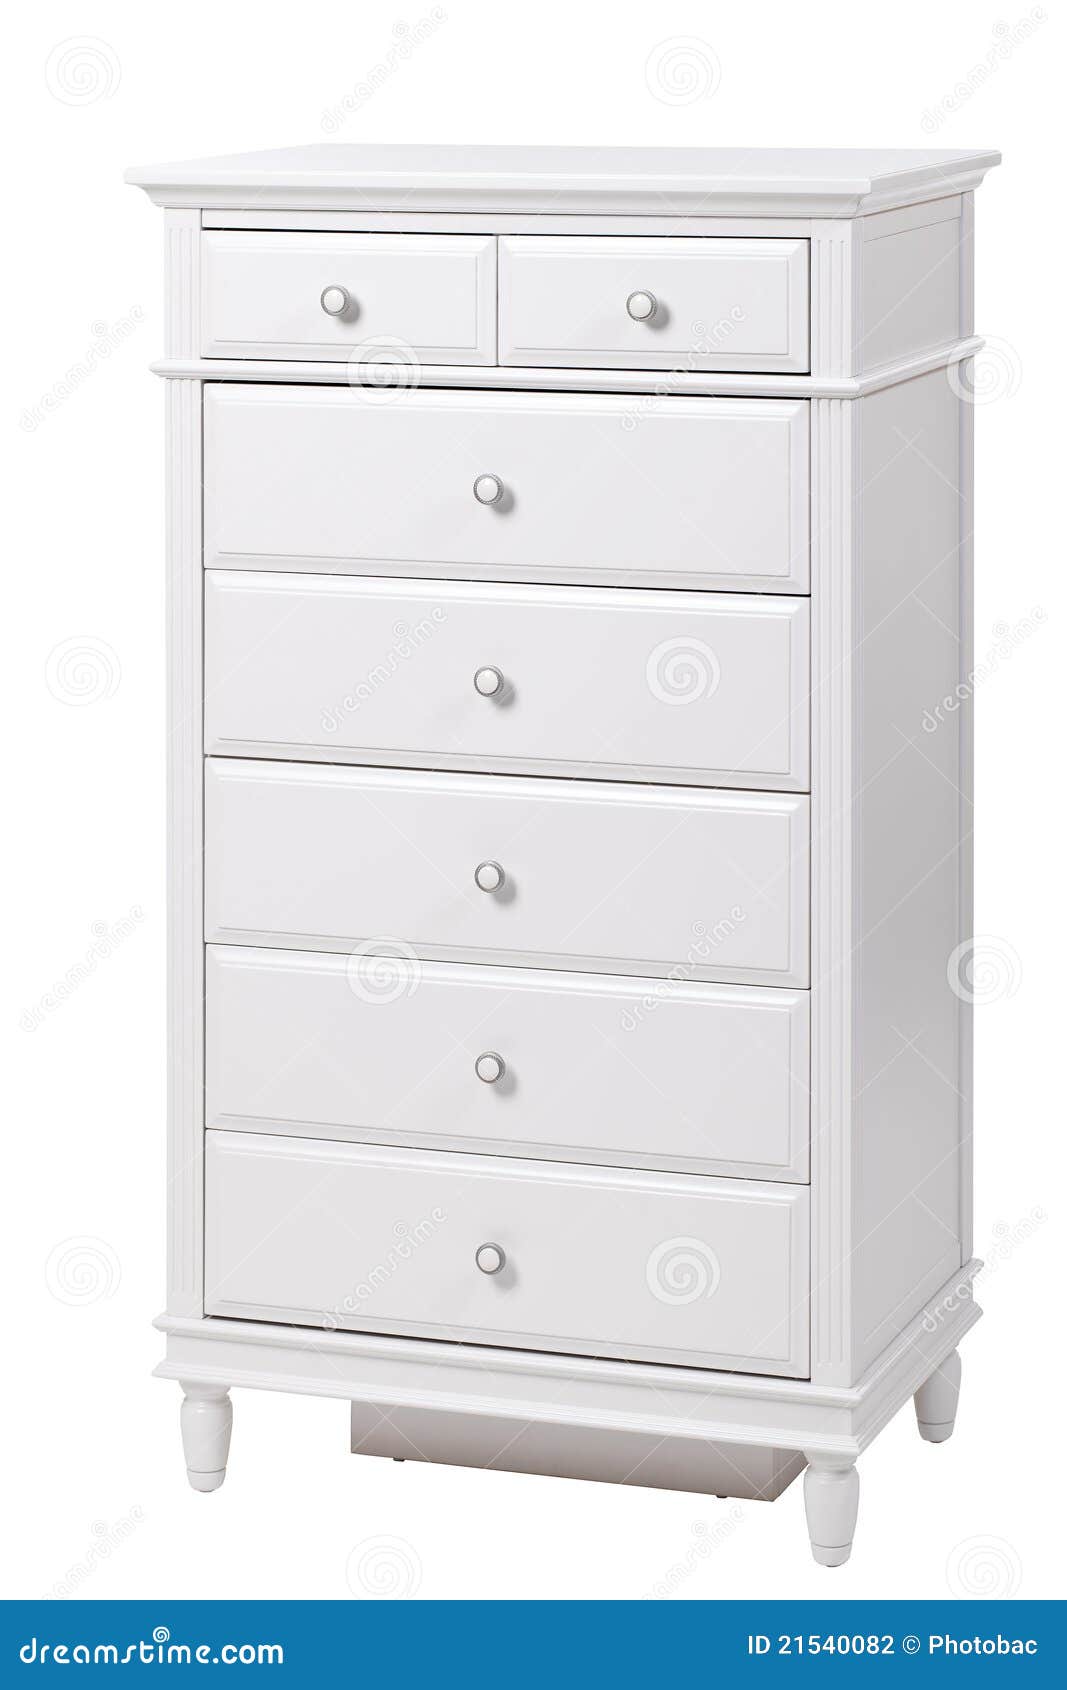 White Wooden Chest Of Drawers Stock Photography - Image: 21540082